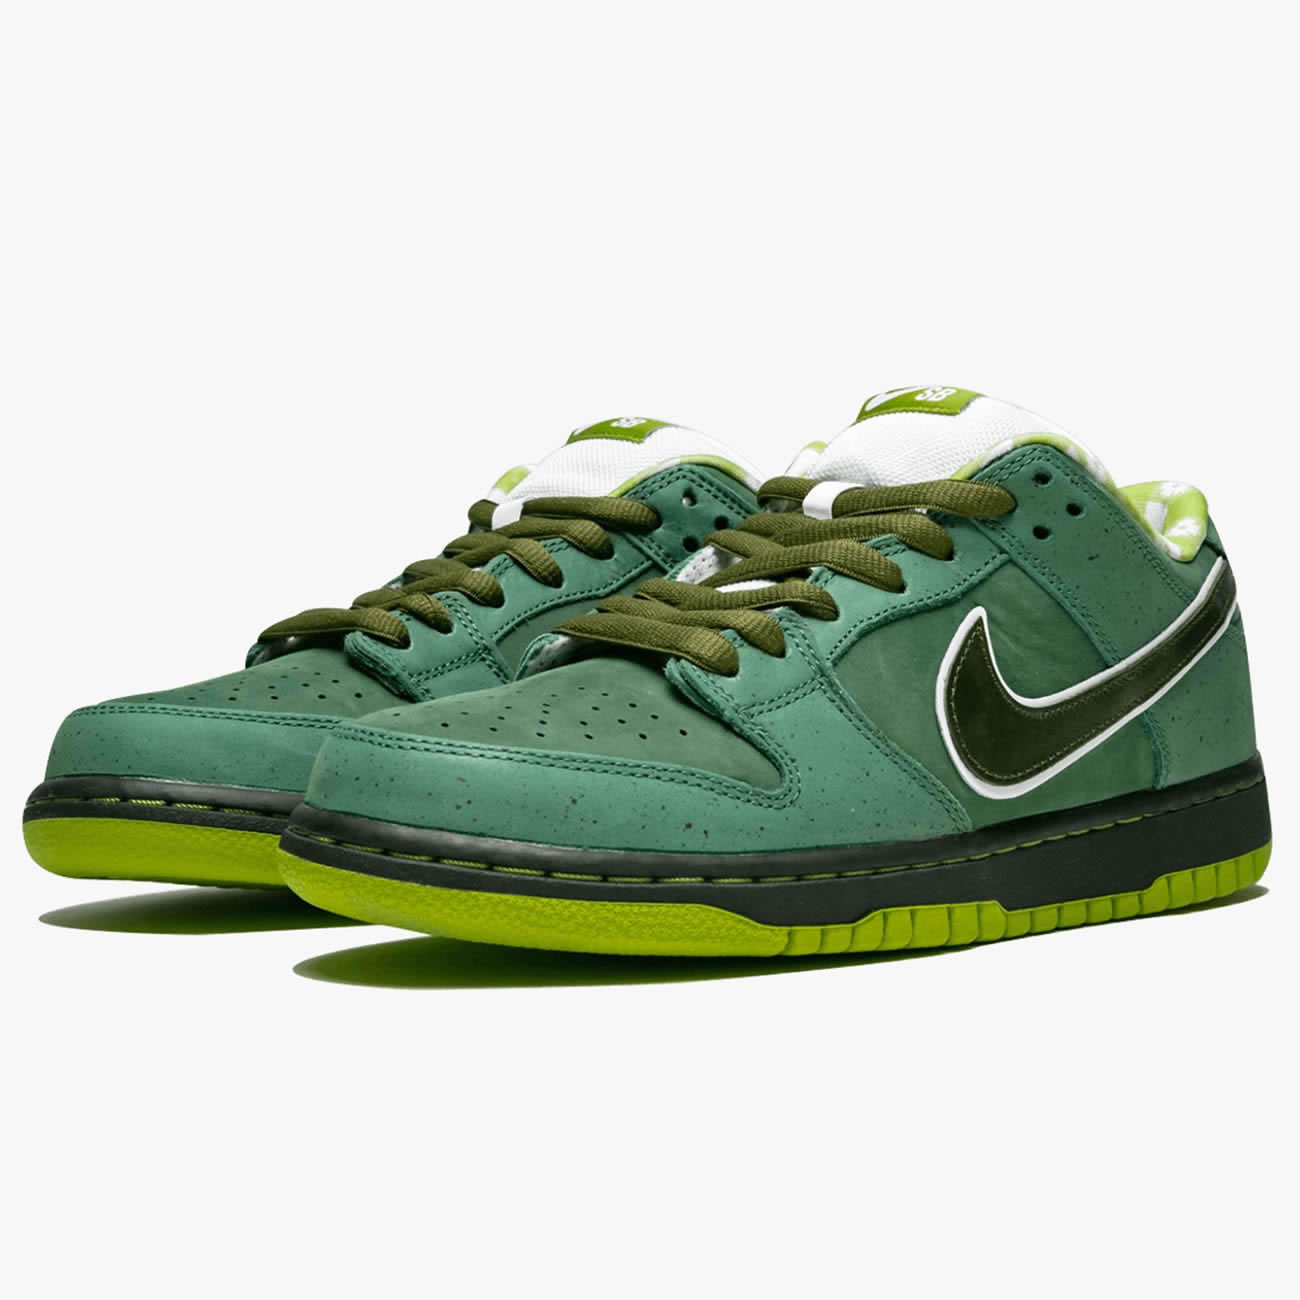 Nike Sb Dunk Low Concepts Green Lobster Bc1310 337 (2) - newkick.org